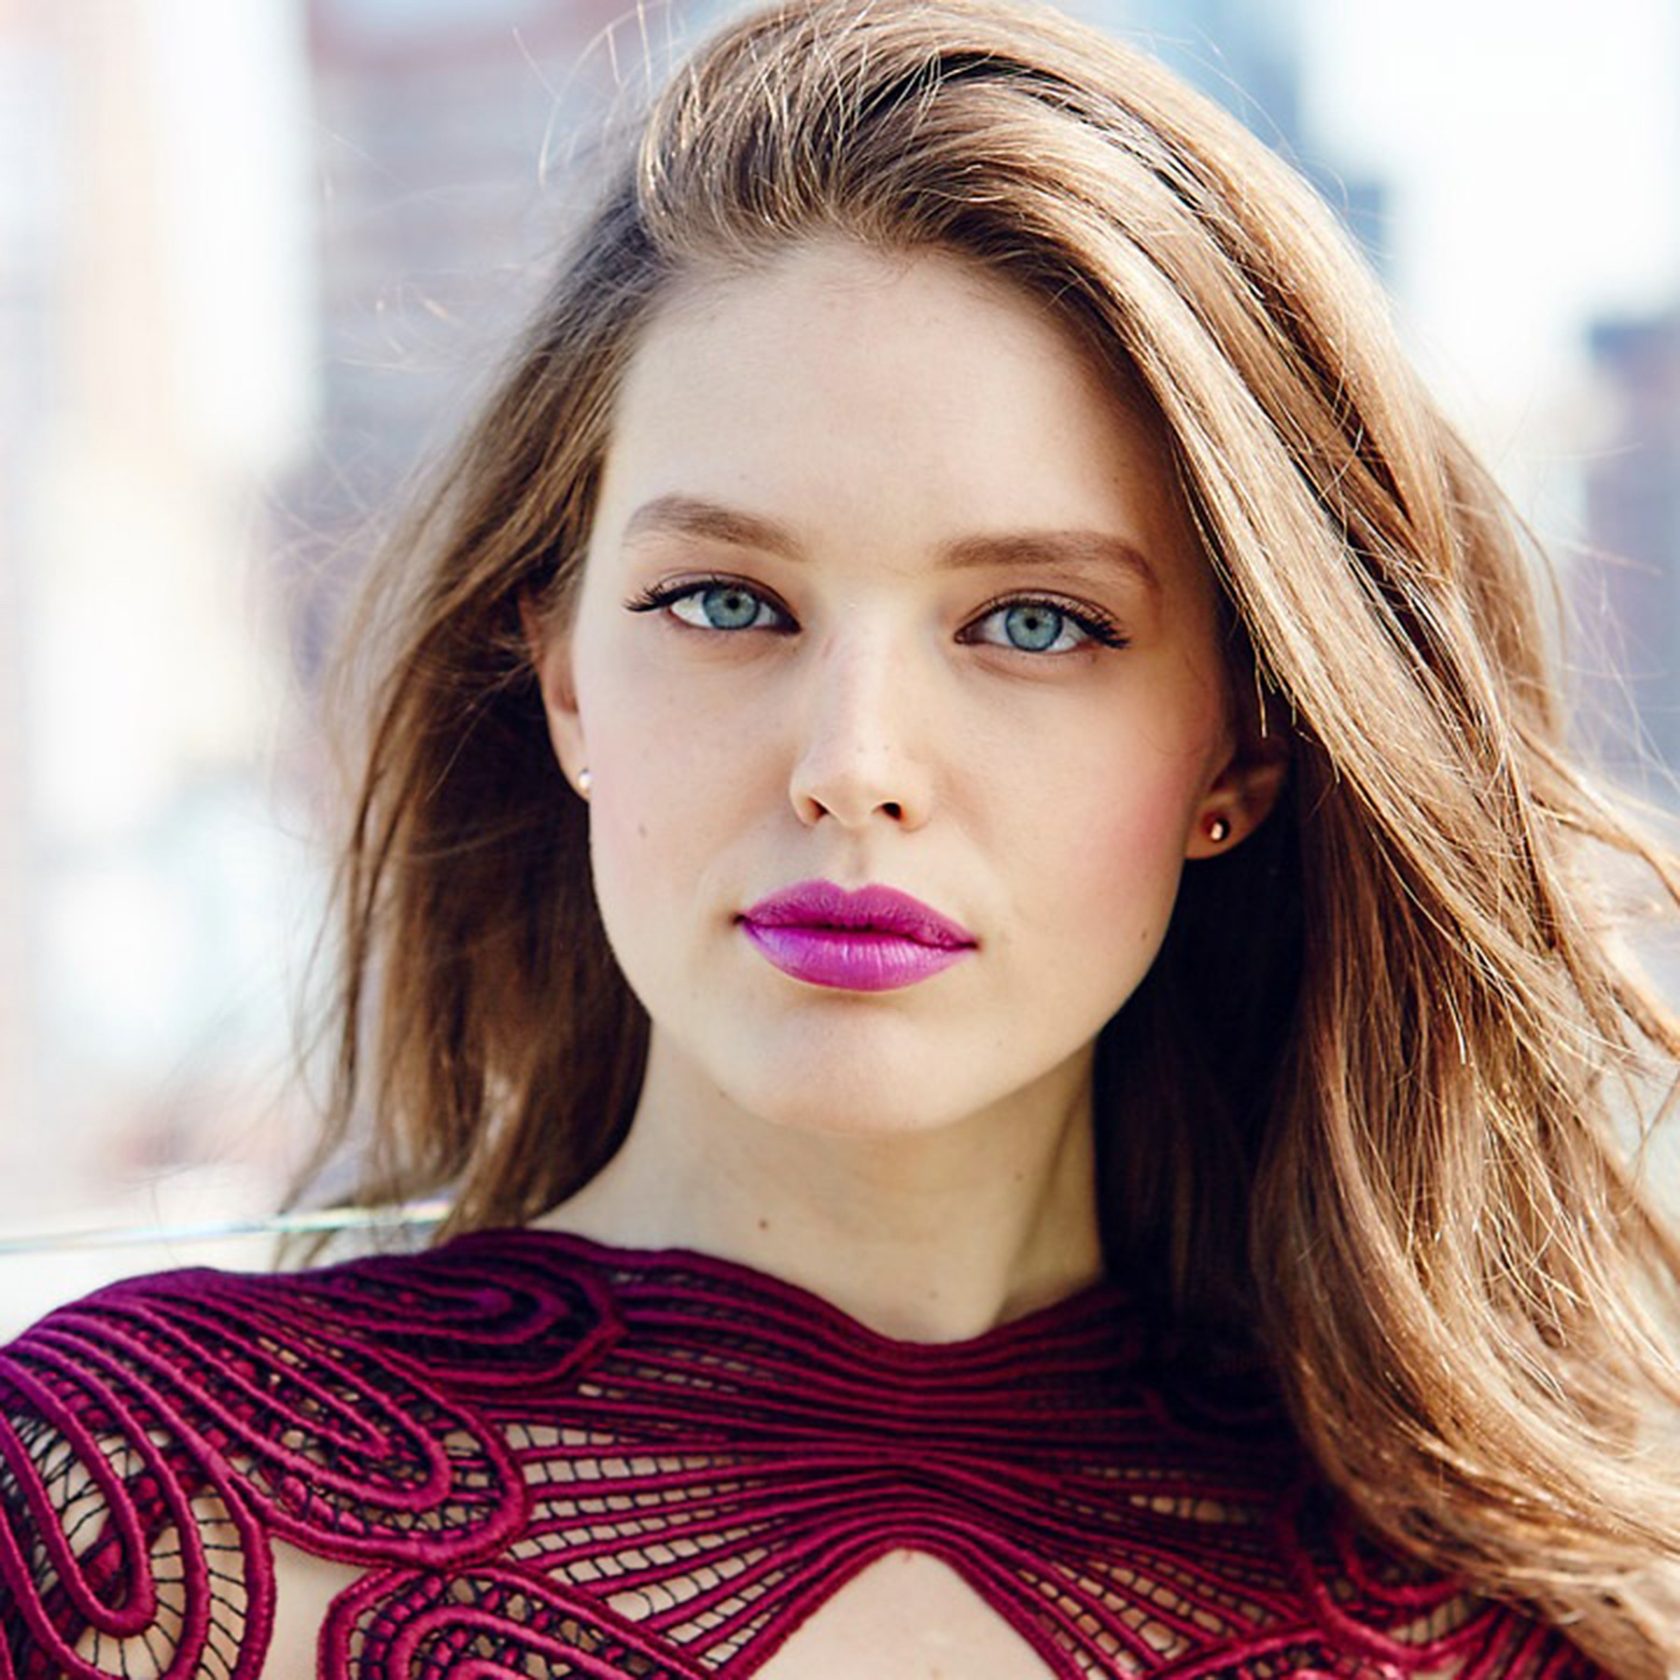 American fashion model Emily DiDonato stars in Maybelline 2016 make up collection., Image: 304782623, License: Rights-managed, Restrictions: EDITORIAL USE ONLY, Model Release: no, Credit line: Profimedia, Balawa Pics